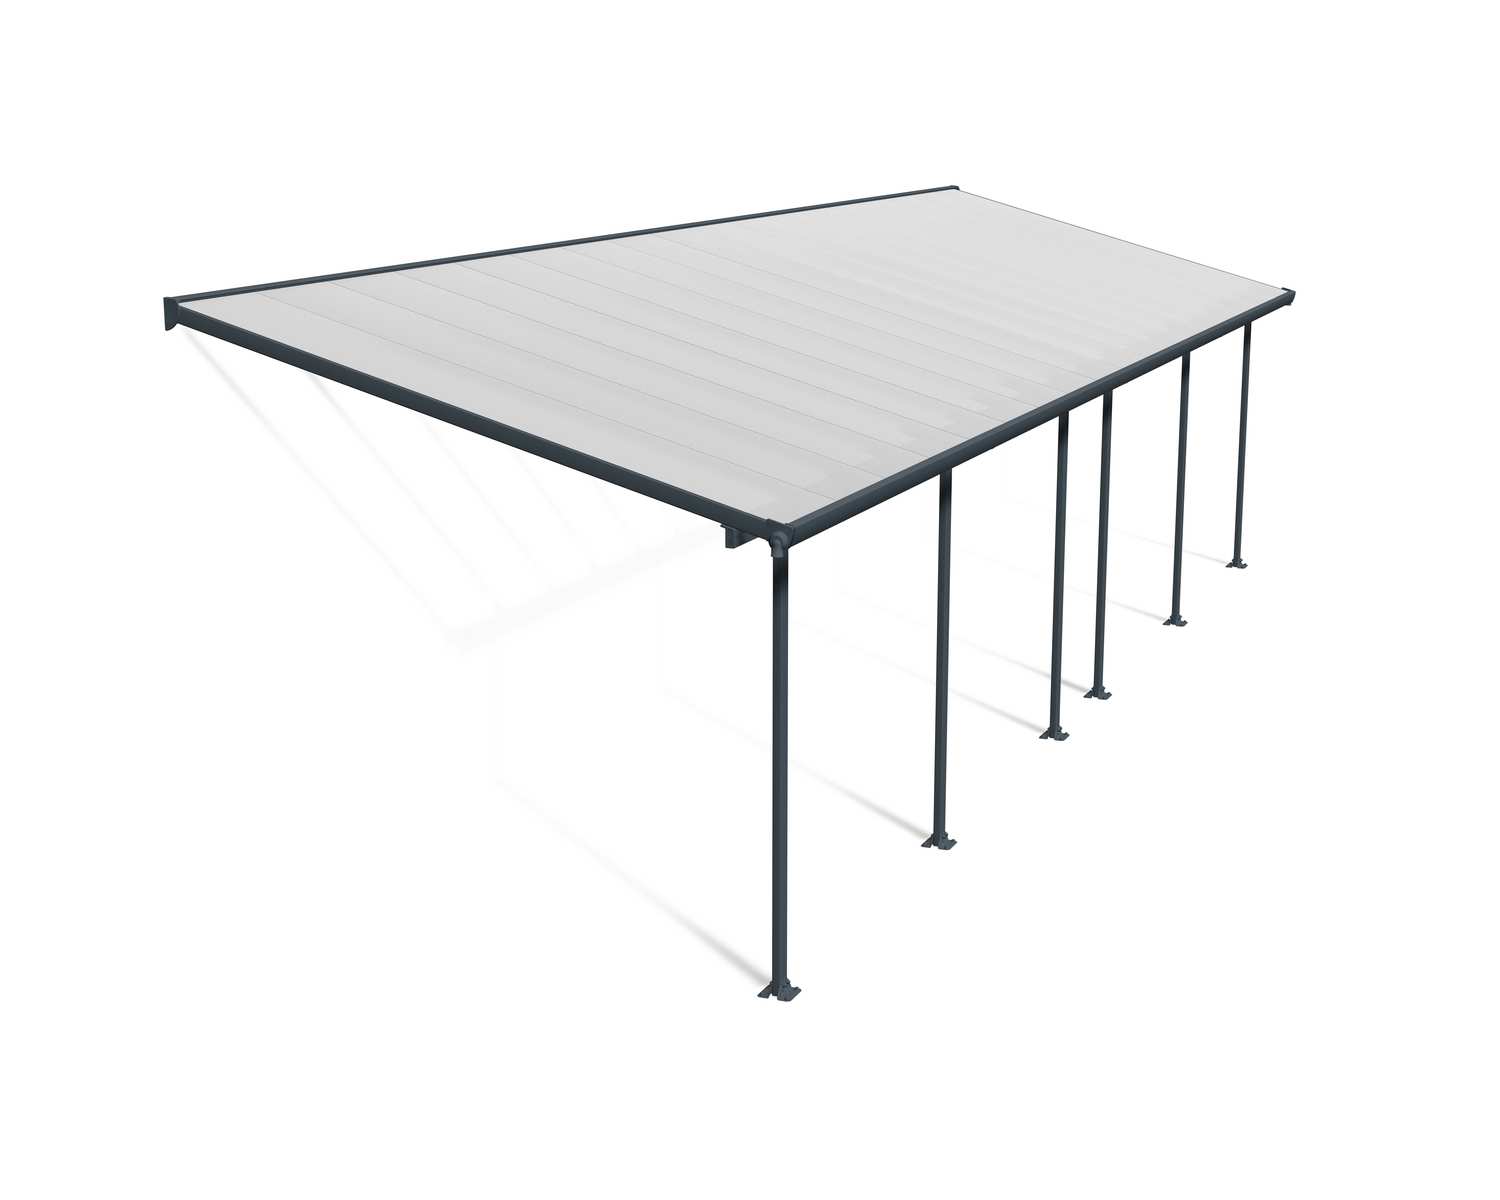 Feria 10 ft. x 32 ft. Grey Aluminium Patio Cover With 6 Posts, Clear Twin-Wall Polycarbonate Roof Panels.